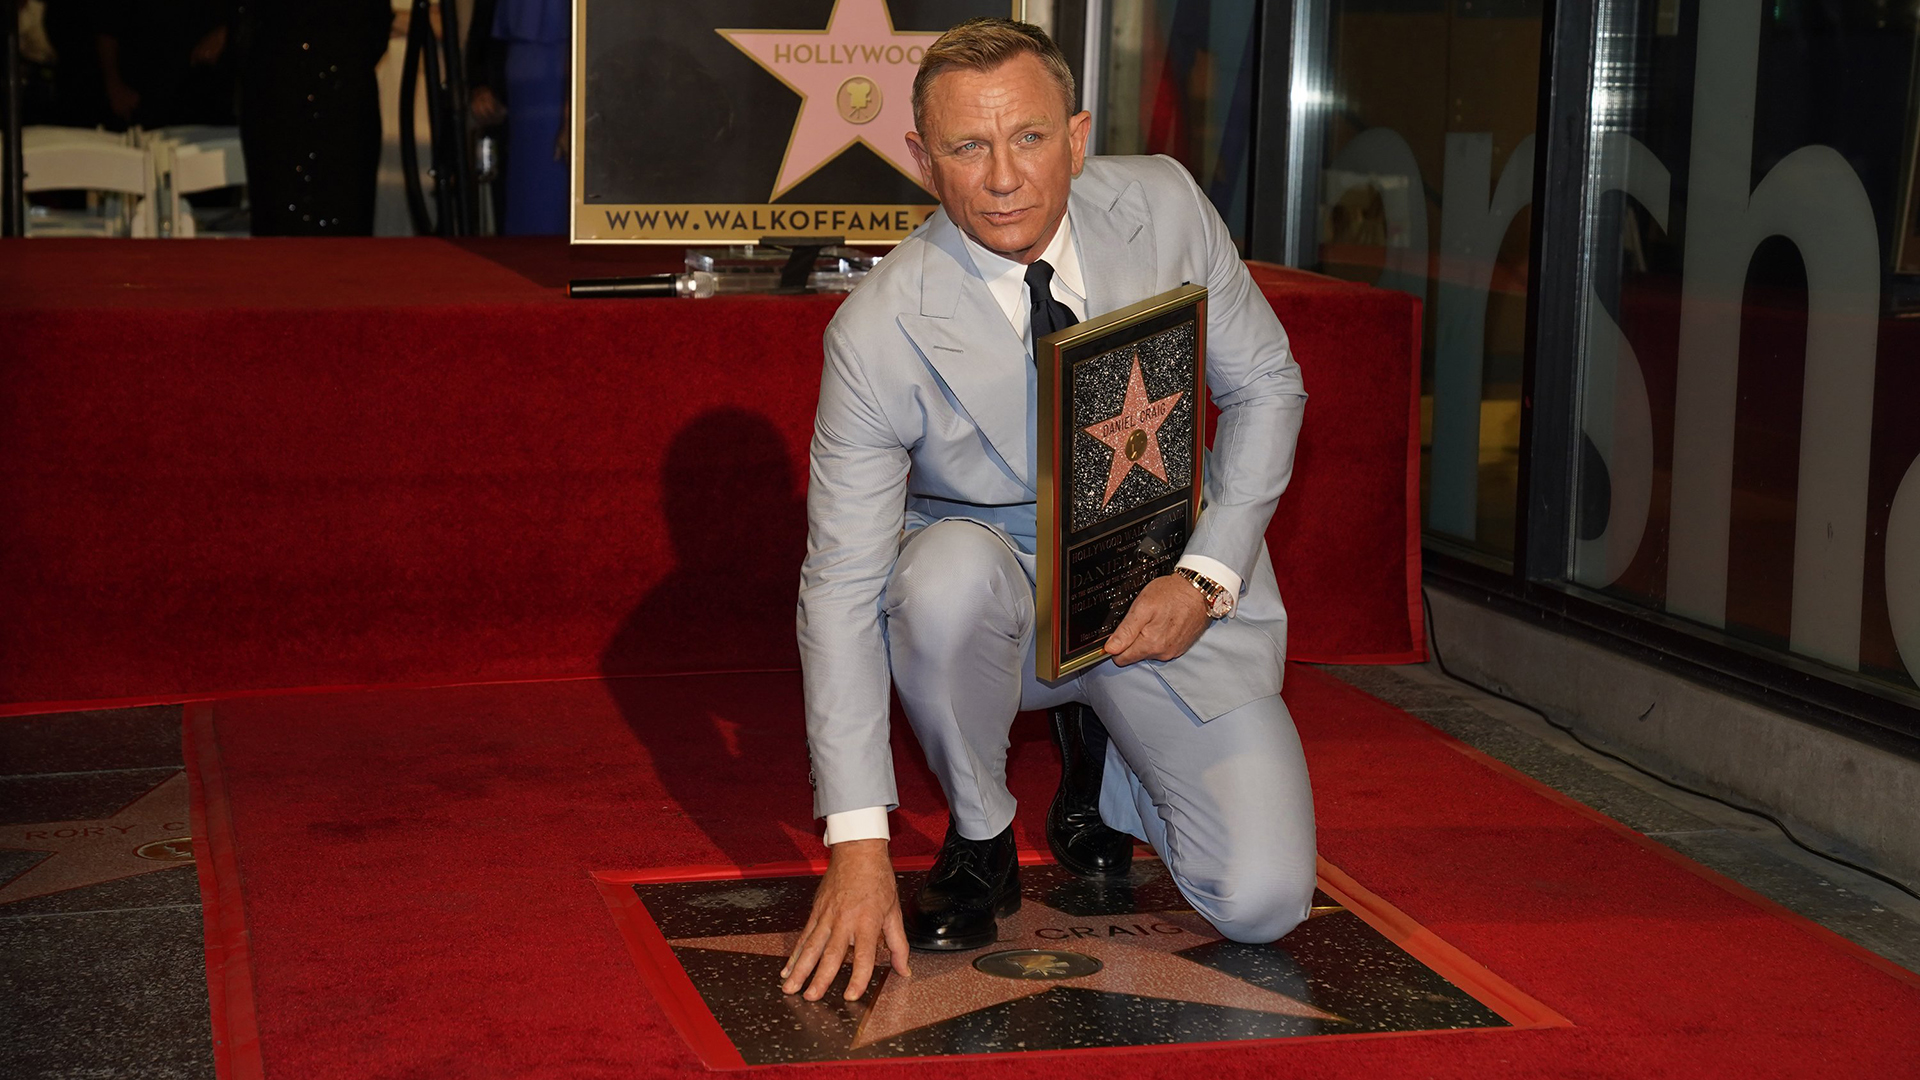 James Bond actor Daniel Craig honored with star on Hollywood Walk of Fame